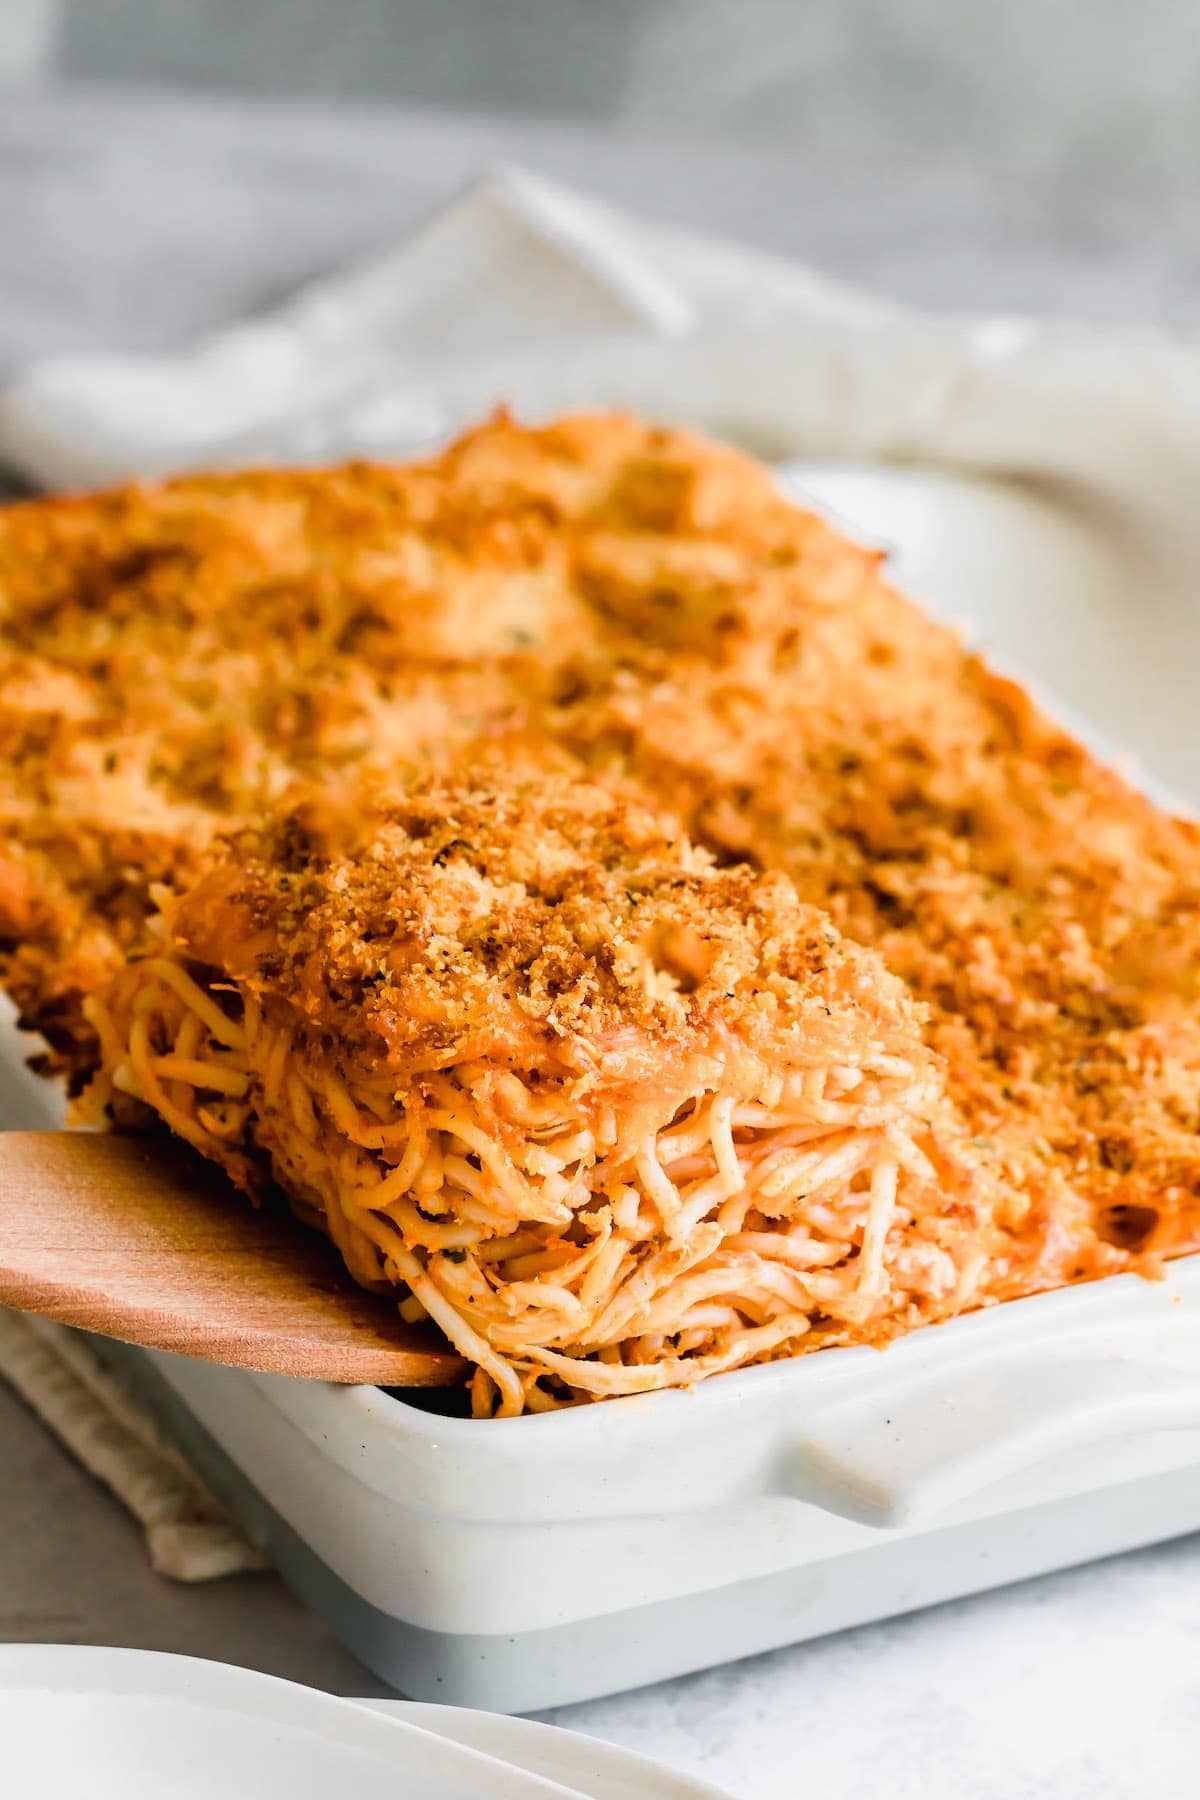 A wooden spatula lifts a serving of chicken spaghetti casserole from a baking dish.